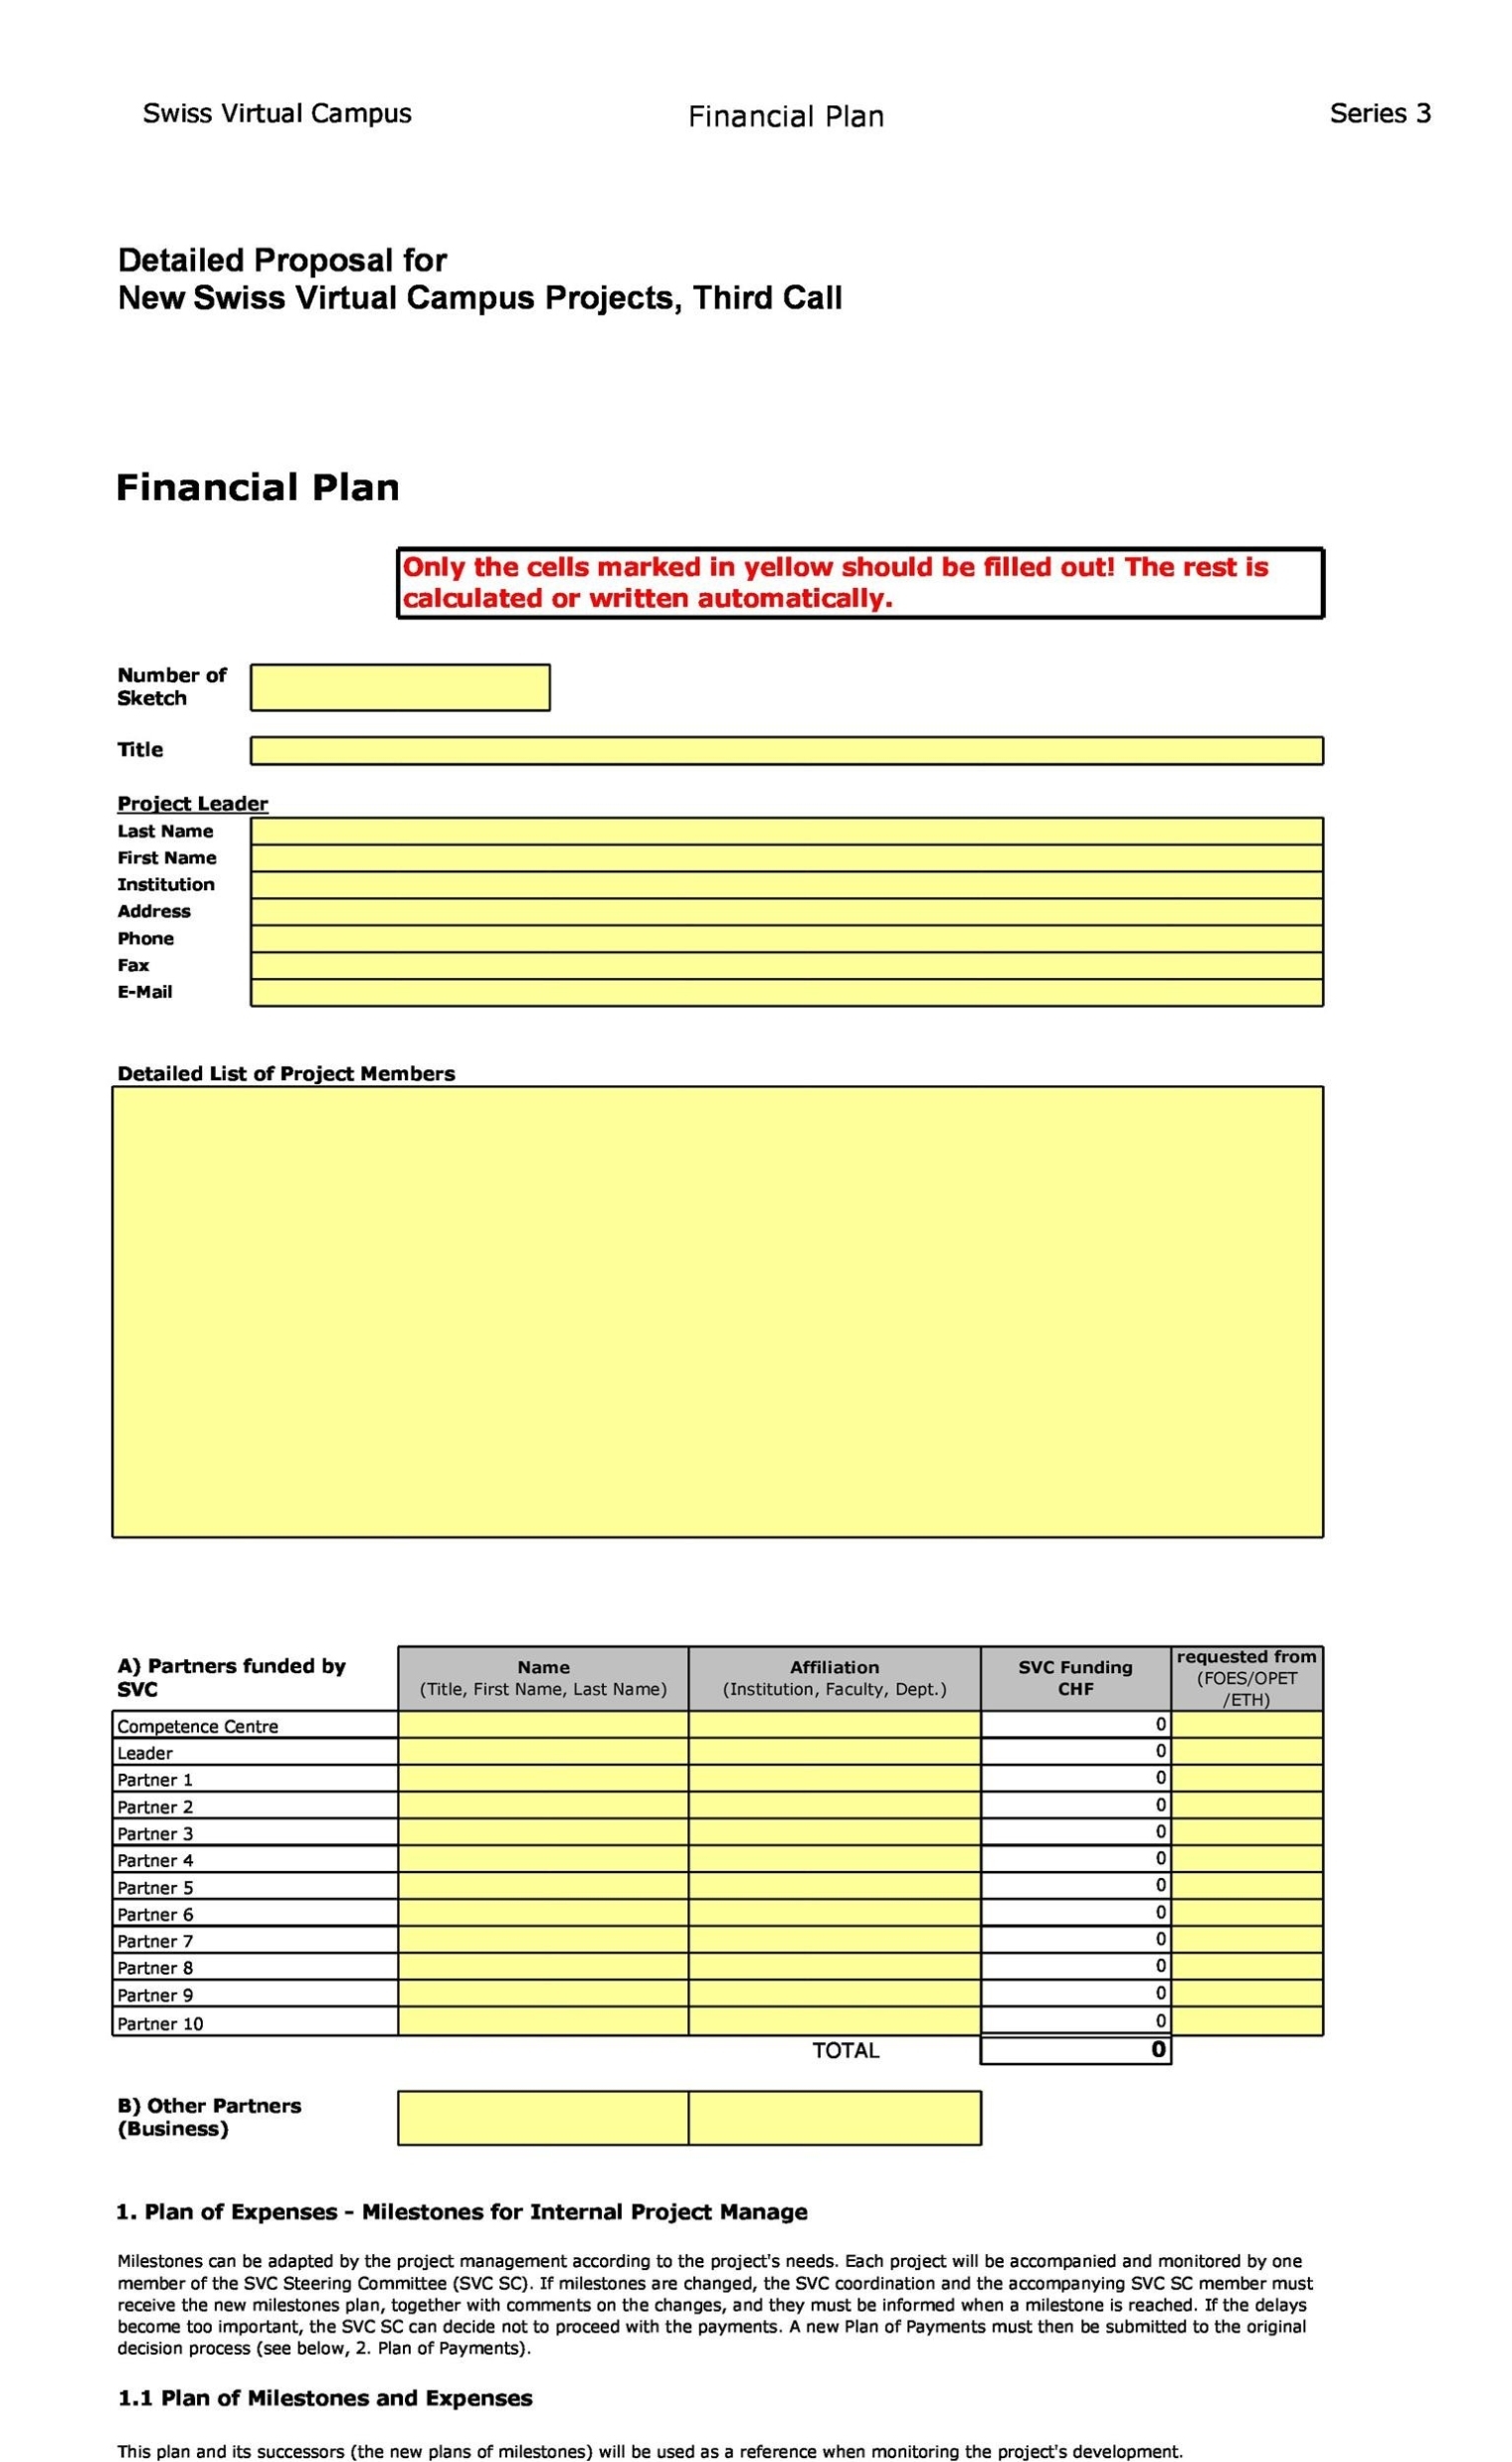 50 Professional Financial Plan Templates [Personal & Business] ᐅ Regarding Financial Plan Template For Startup Business